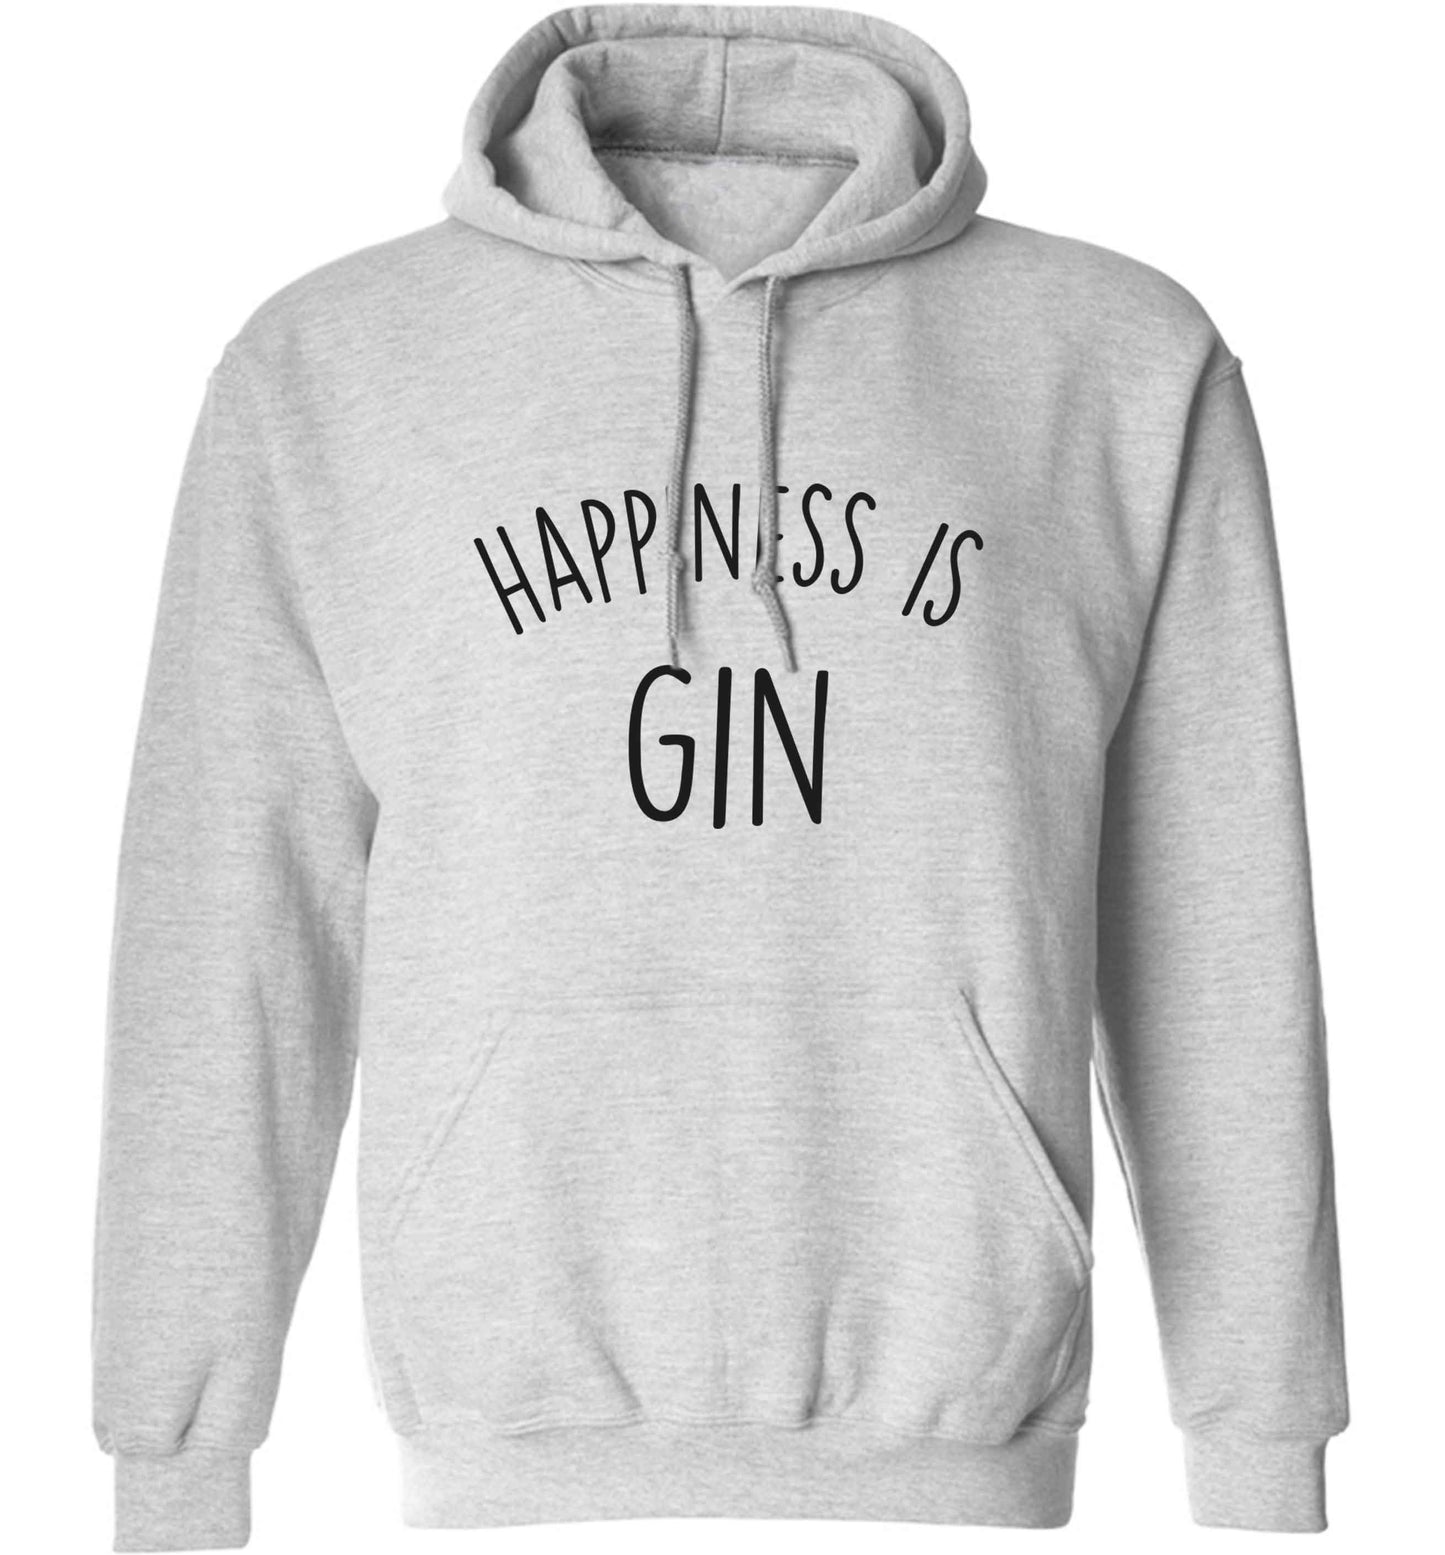 Happiness is gin adults unisex grey hoodie 2XL